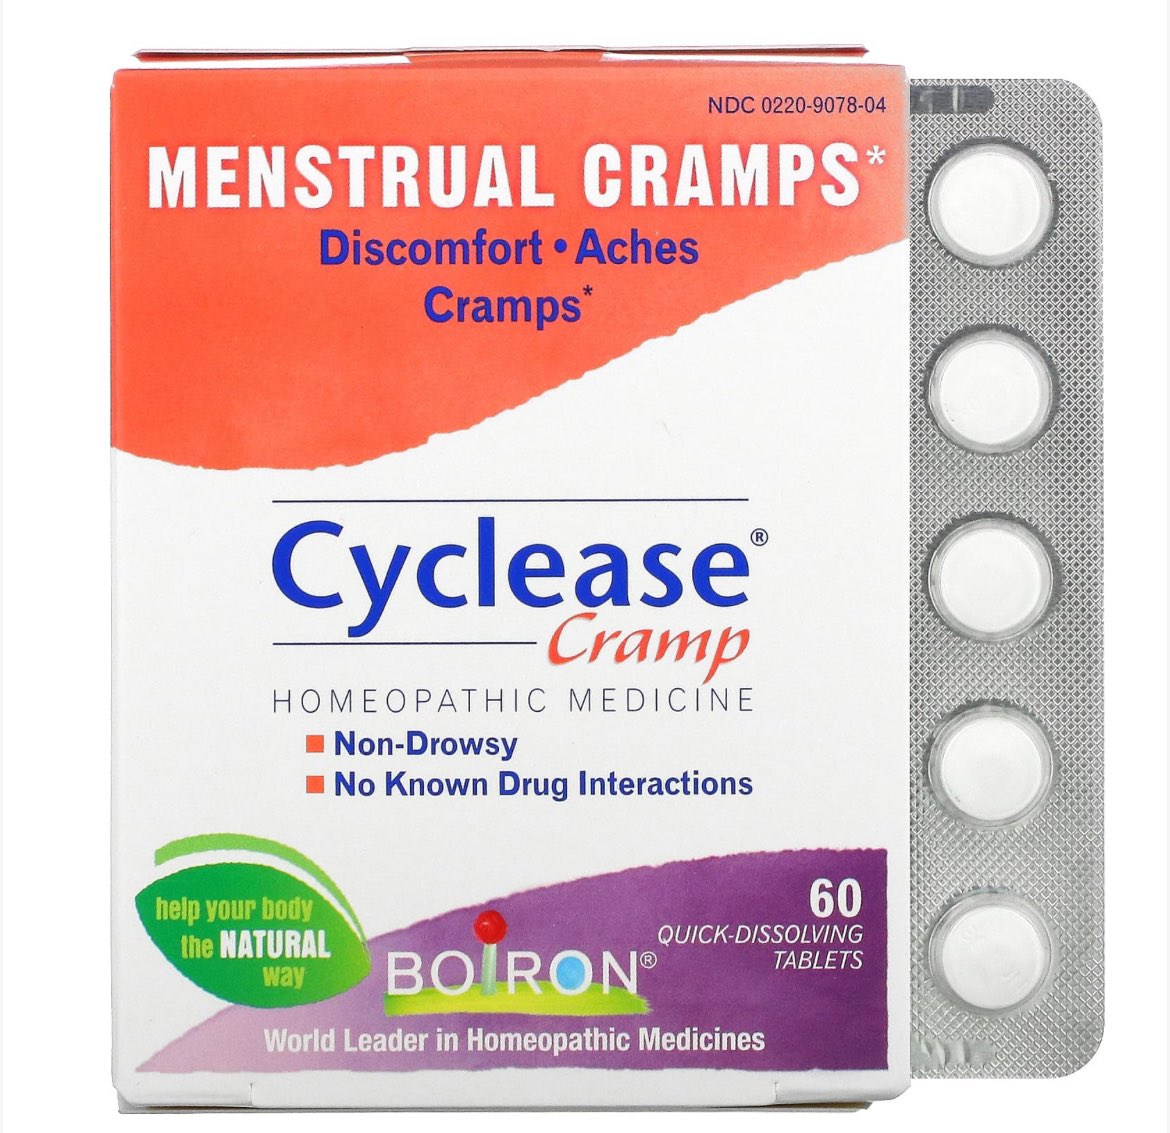 Cyclease Cramp Tablets, 60 meltaway tablets at Whole Foods Market